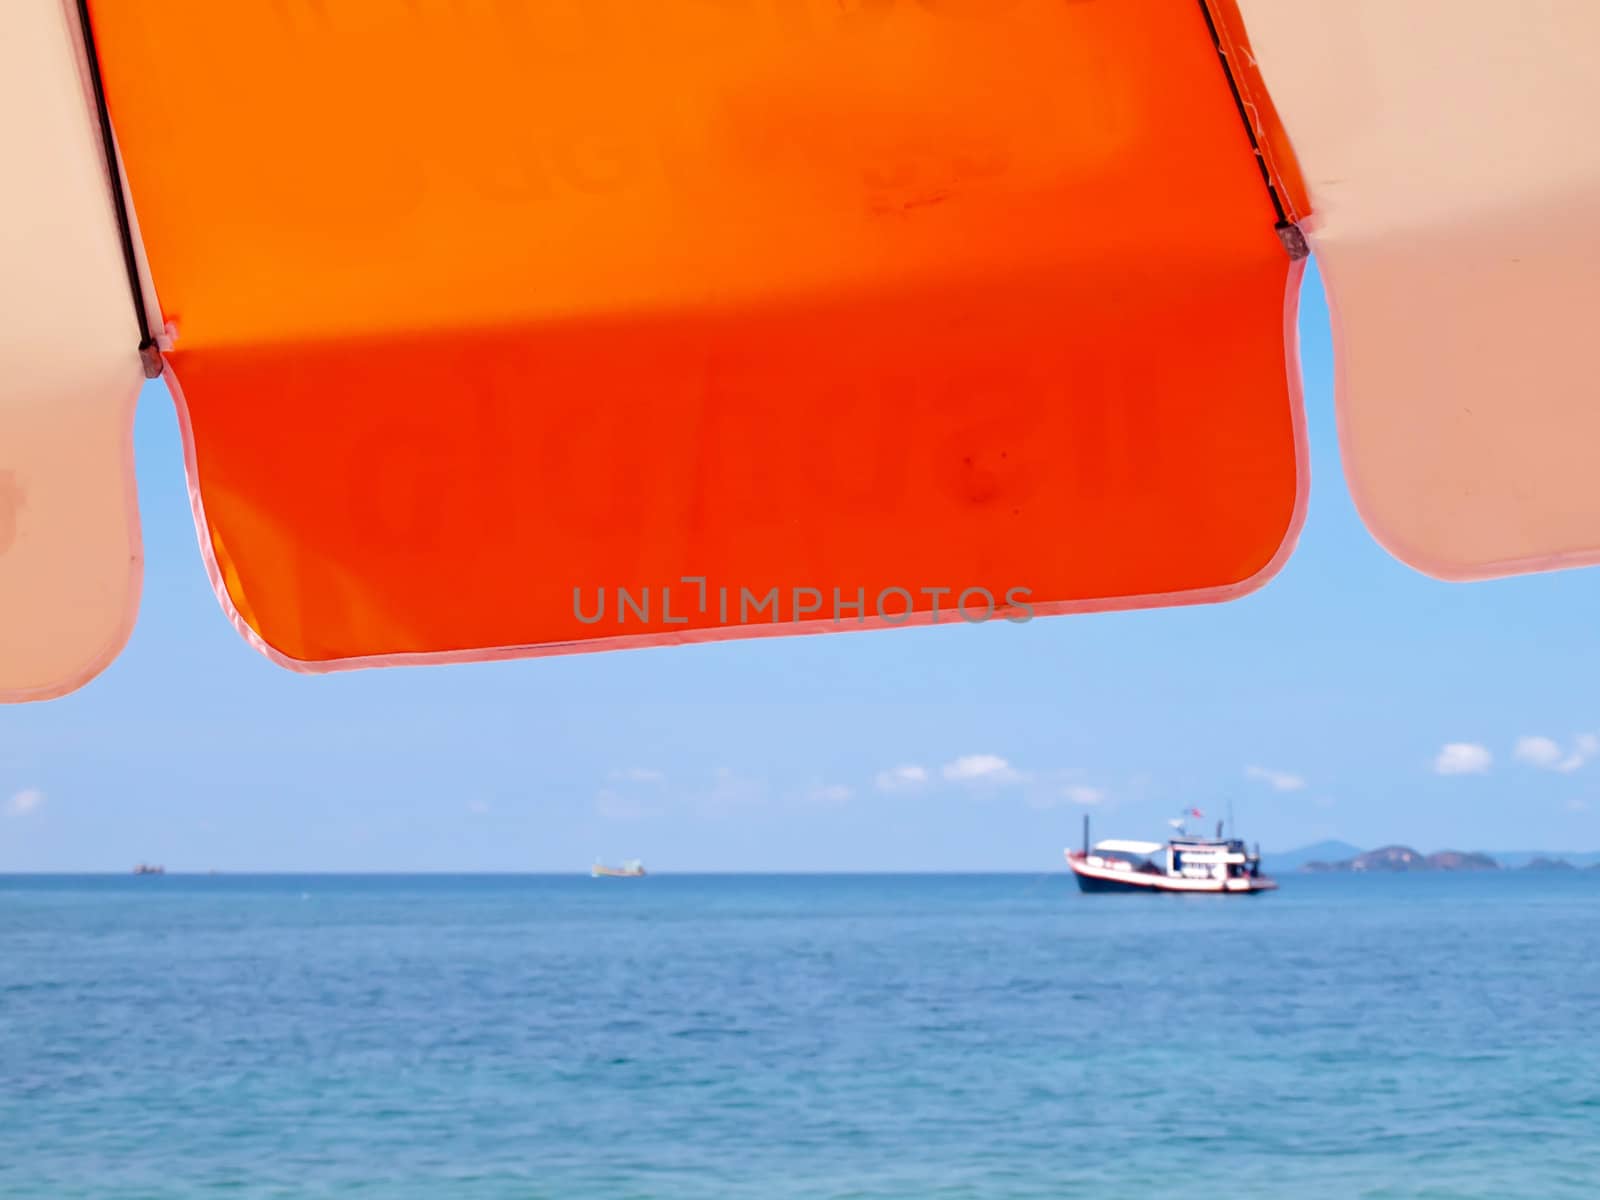 Sunshade with boat in island in sunny summer day